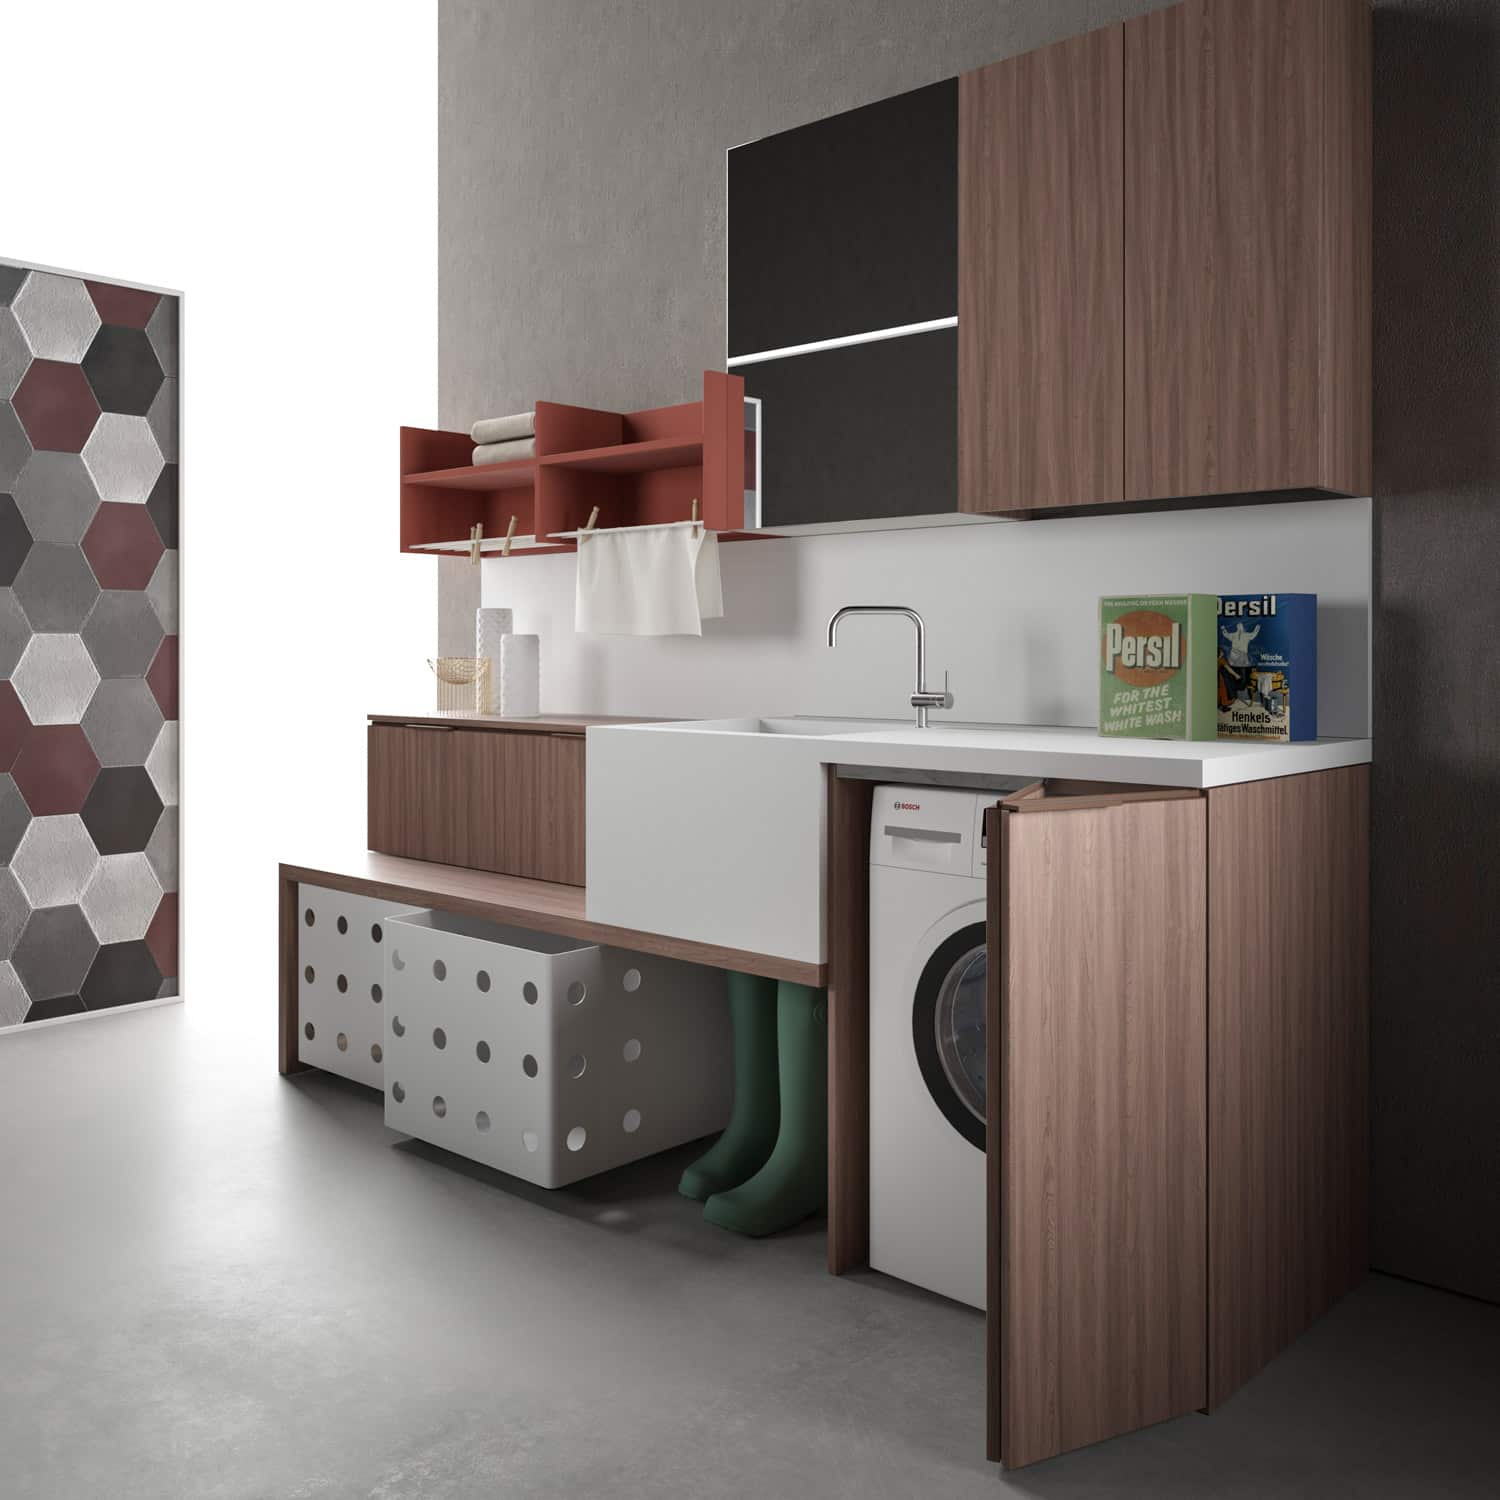 Playing with different depths, as well as open and closed elements, this Drop laundry room offers functional storage and surfaces. Base cabinets with bi-folding or hinged doors can conceal the washer and dryer.